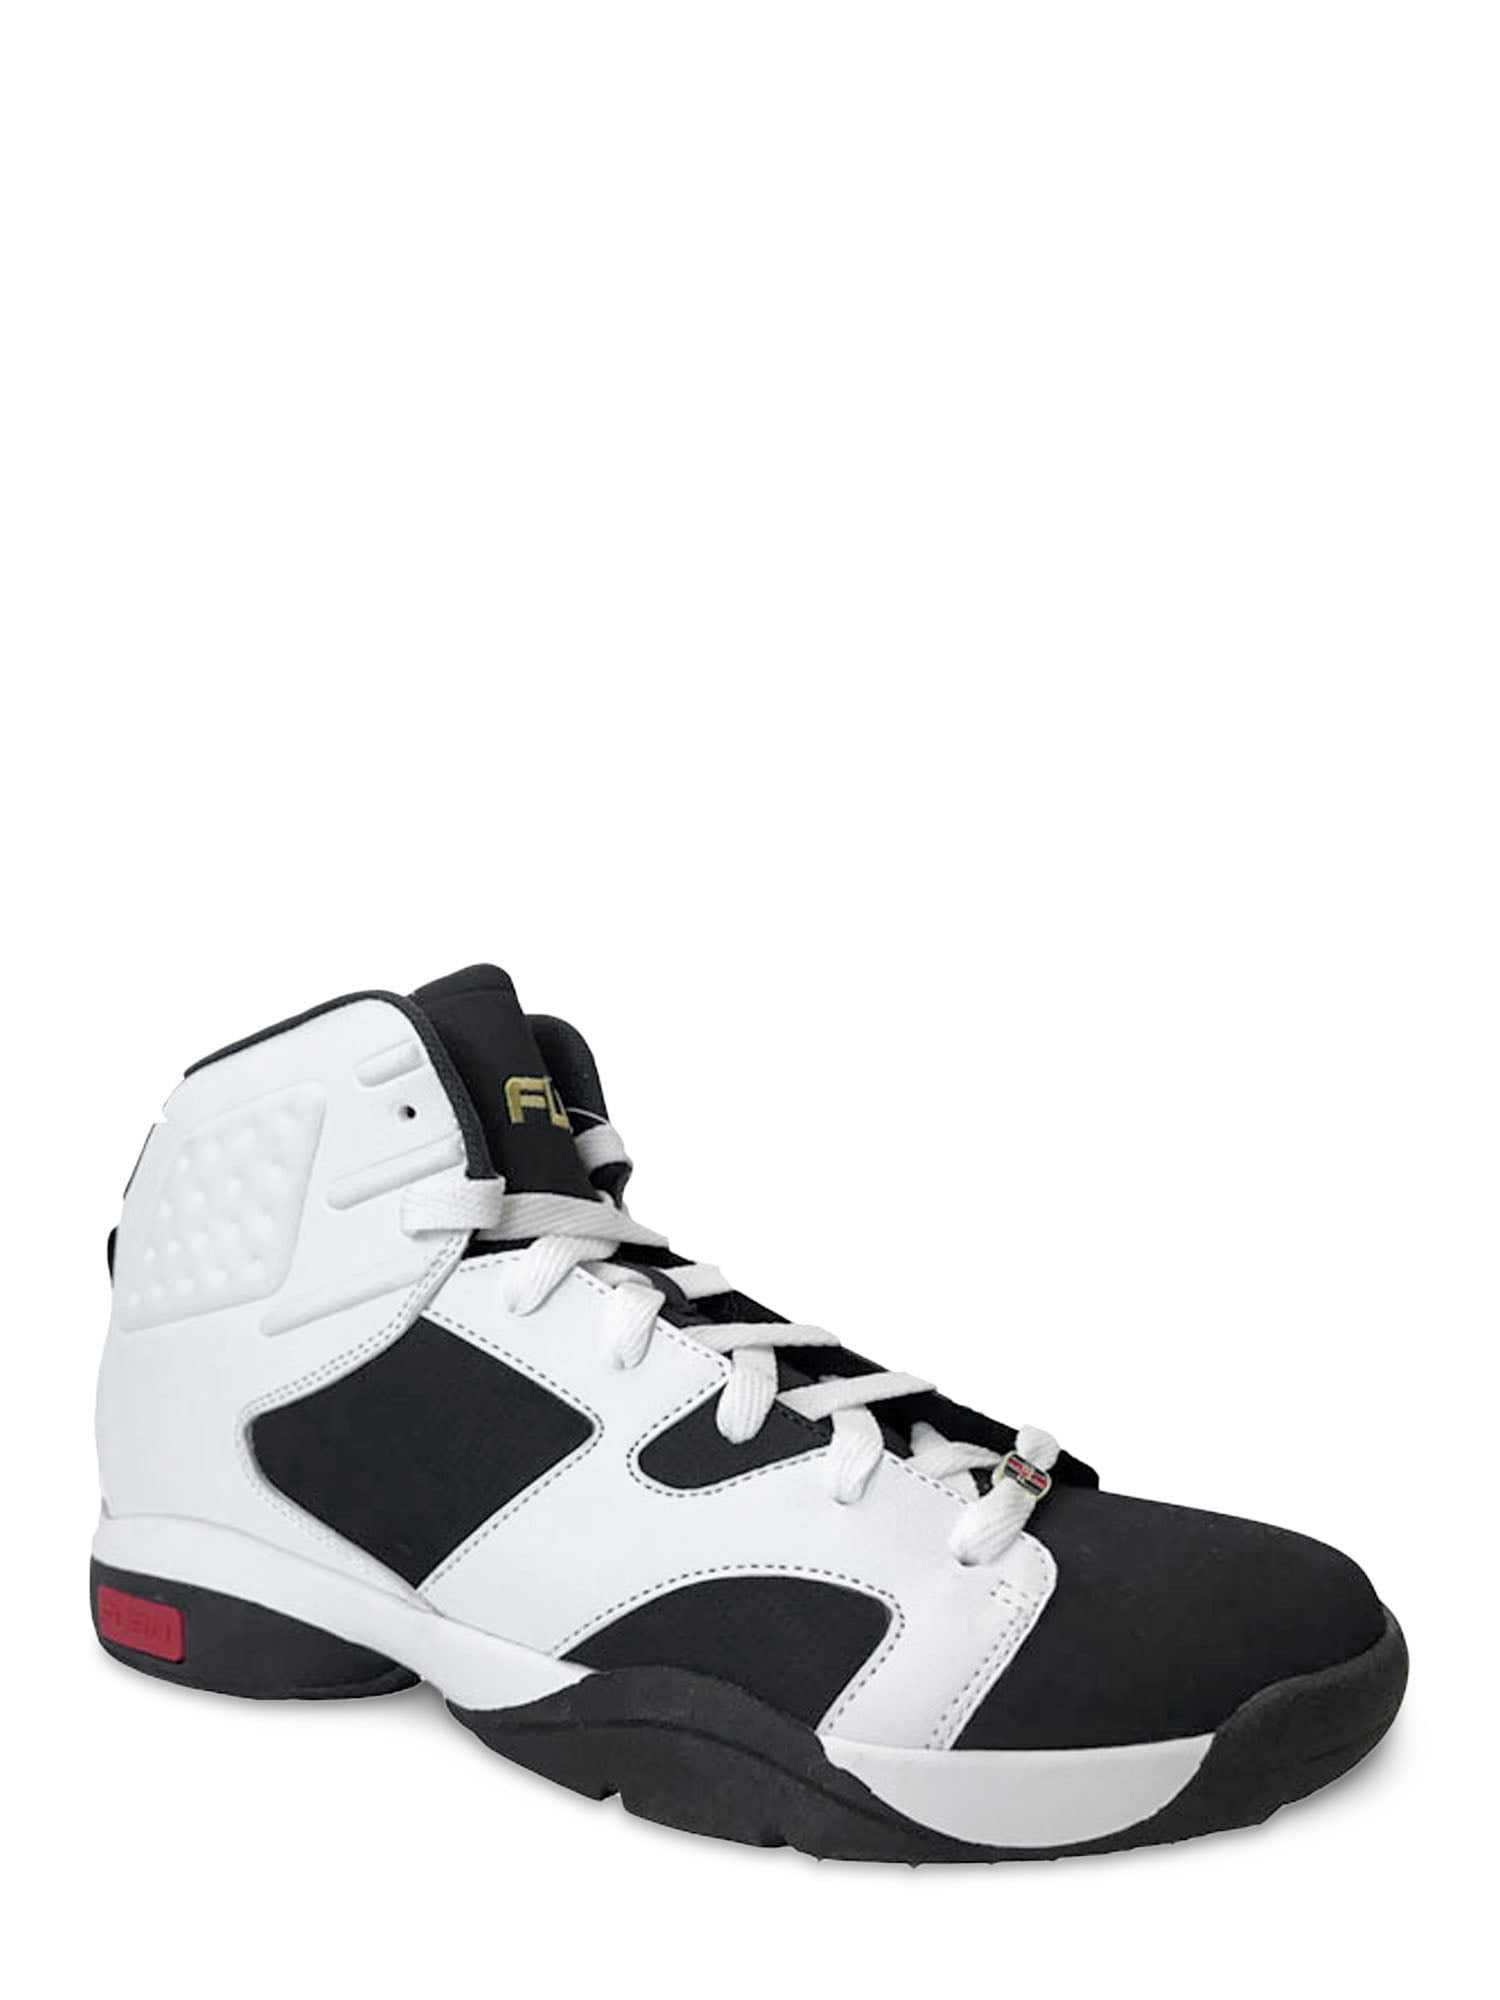 fubu shoes black and red